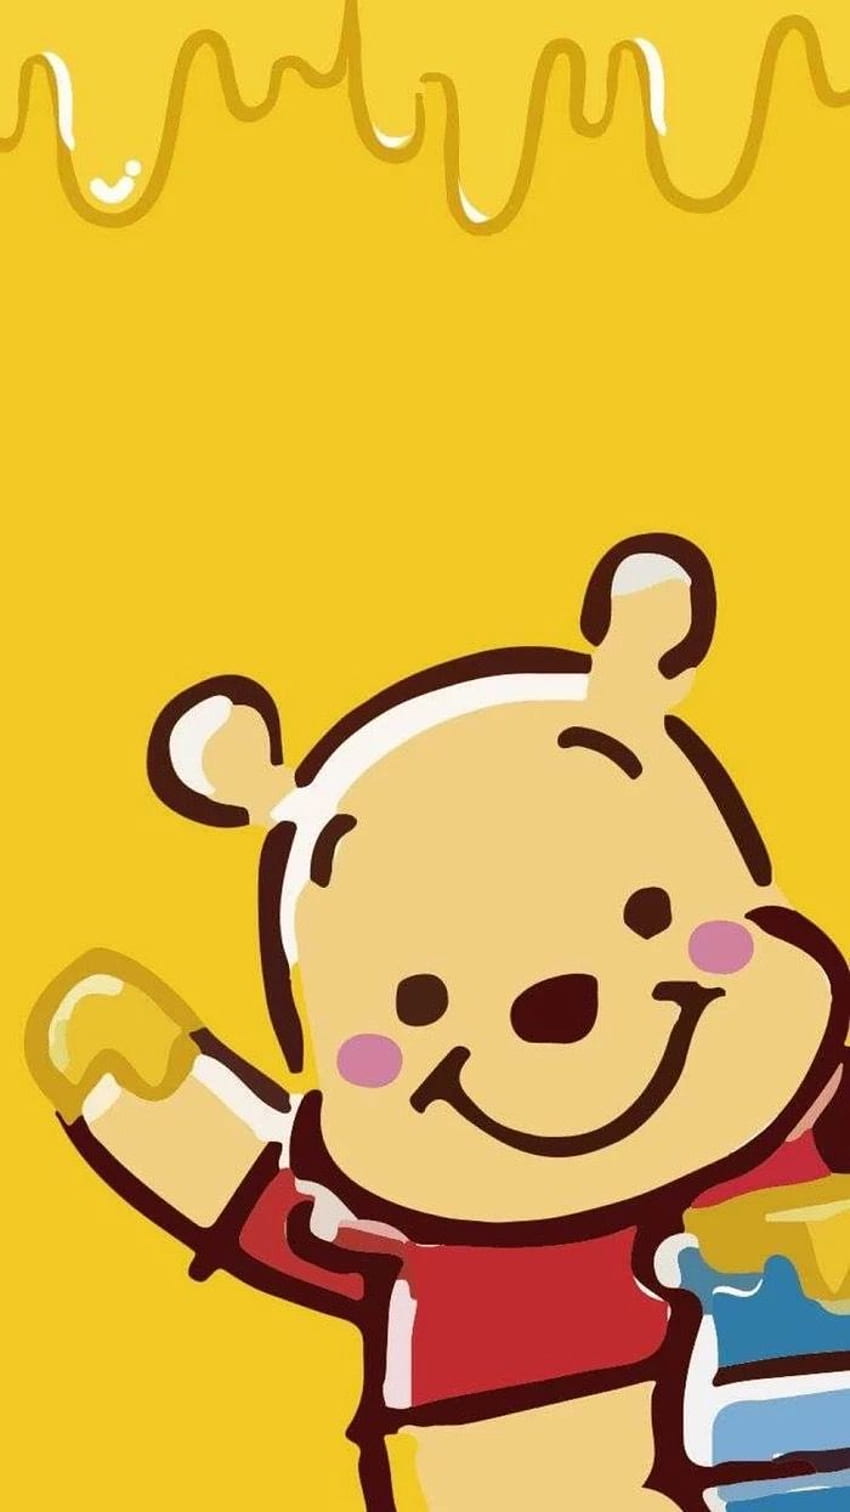  Be Positive   WINNIE THE POOH WALLPAPERS